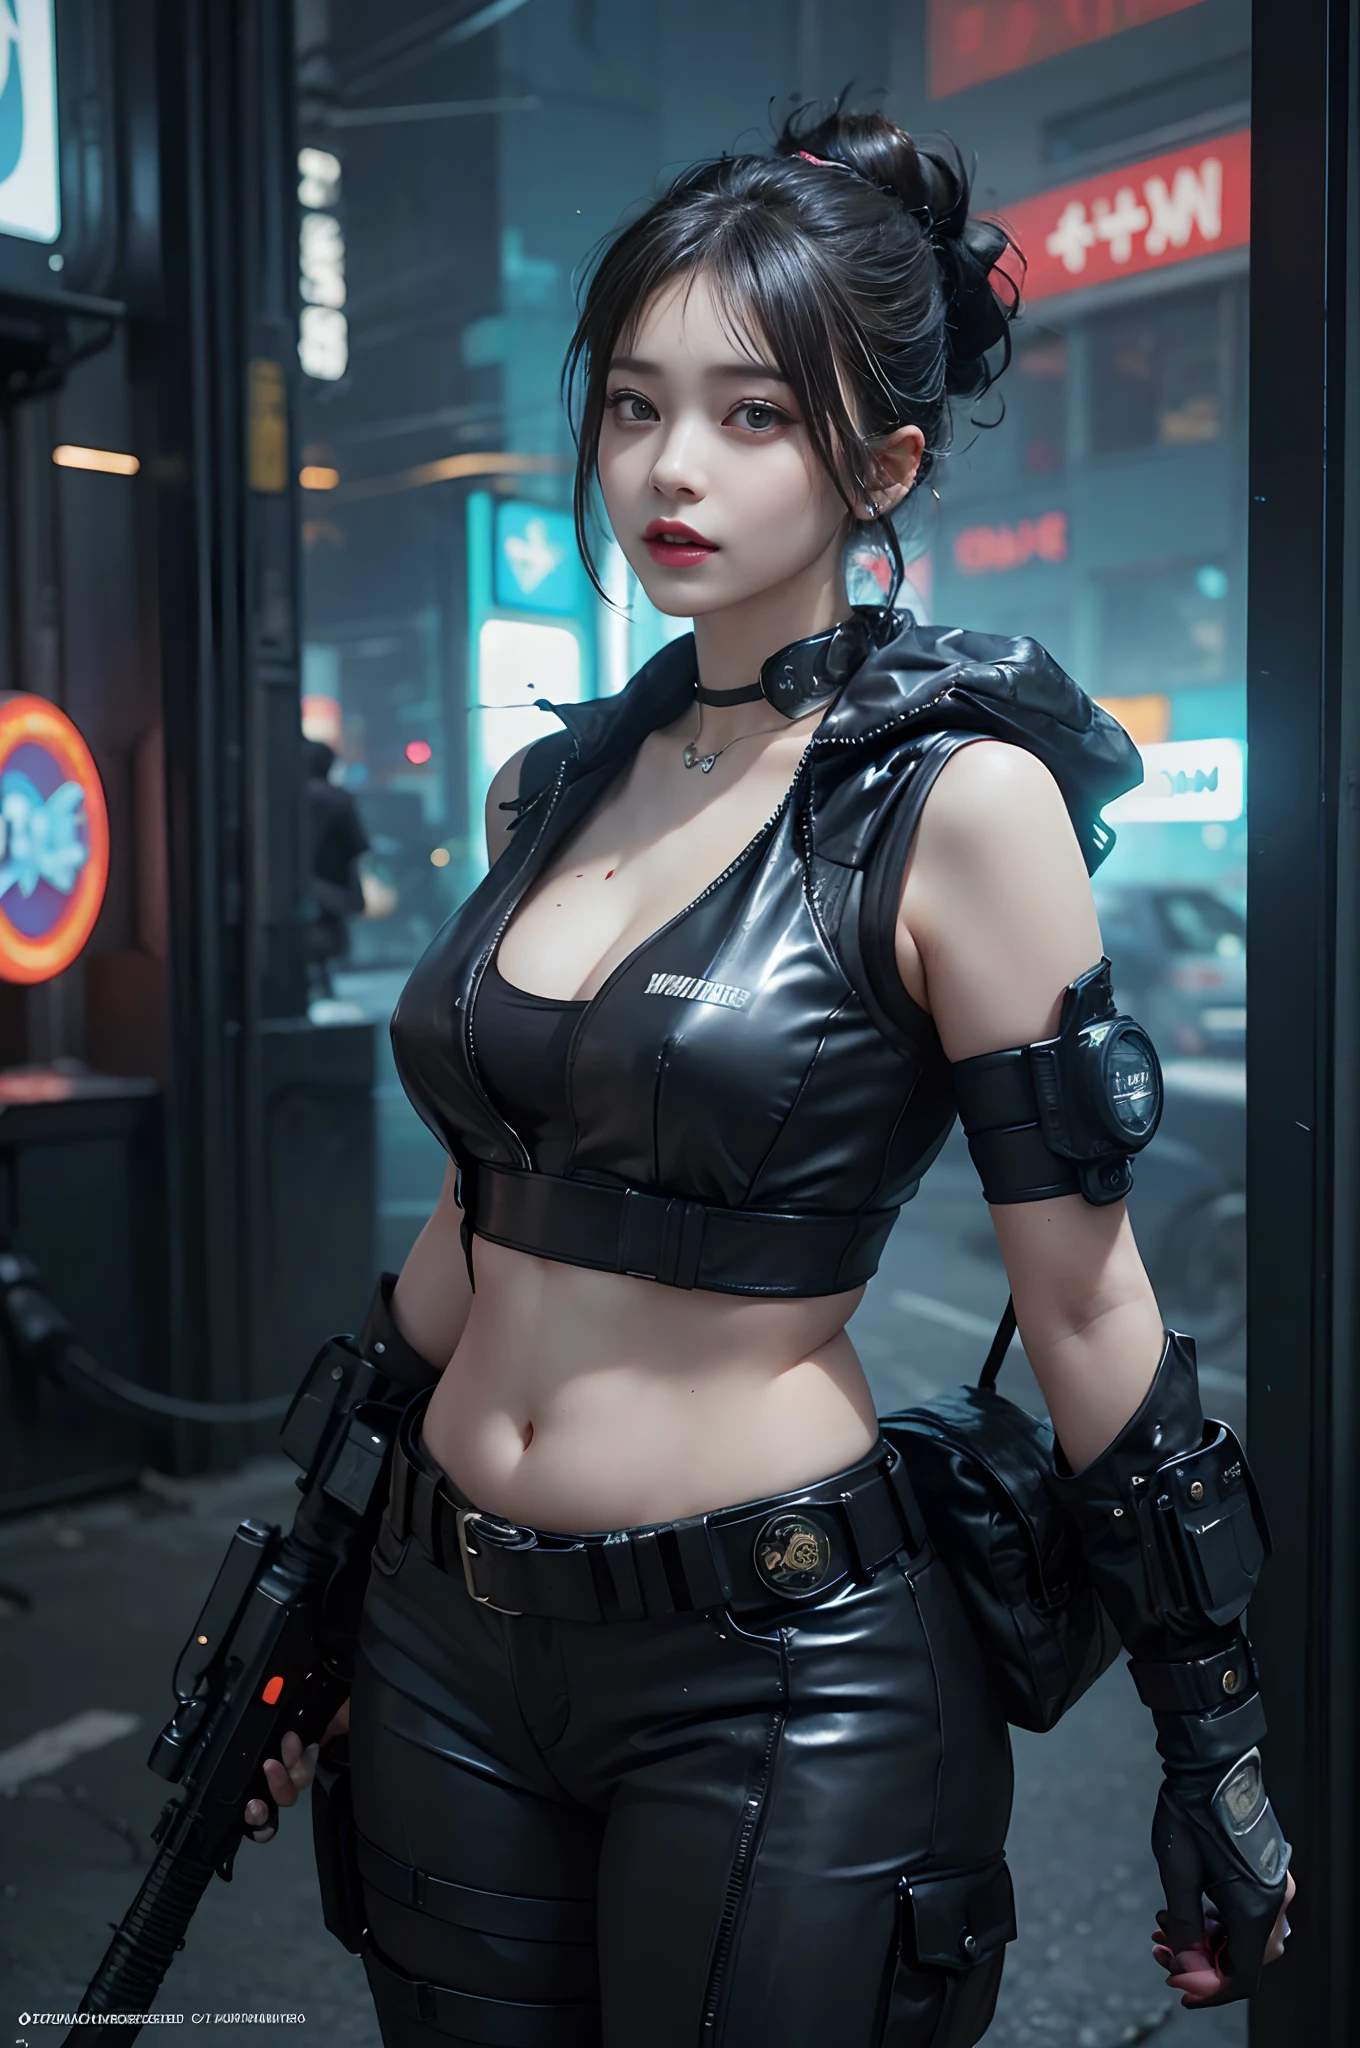 best quality, highres, textured skin, 8k, Anatomically correct, masterpiece:1.2, photo-realistic:1.2, super realistic details, Realistic proportions, extremely detailed face, round face, solid circle eyes, chubby girl, curvy:1.2, looking at viewer, (((Cyberpunk female special forces soldier:1.5, highly intricate detail cyberpunk special forces costume, special forces crest:1.3, heavy Armed girls , Armed with the cyberpunk laser rifle:1.5, modern equipment, Mechanical latex bodysuit with intricate detailing:1.4, tactical vest ,military harness, magazine belt, survival knife, midriff))), Confident smile, Various stylish ponytail, gigantic breasts, cleavage, gleaming skin, cyberpunk dystopian city, City of the Future, 2080s, night scene, Beautiful Neon Lights, No people in the background, A scene from a movie, cinematic lighting, cinematic shadows, vibrant colors, feminine yet authoritative, attention to facial features and makeup, depth of field, Futurism,